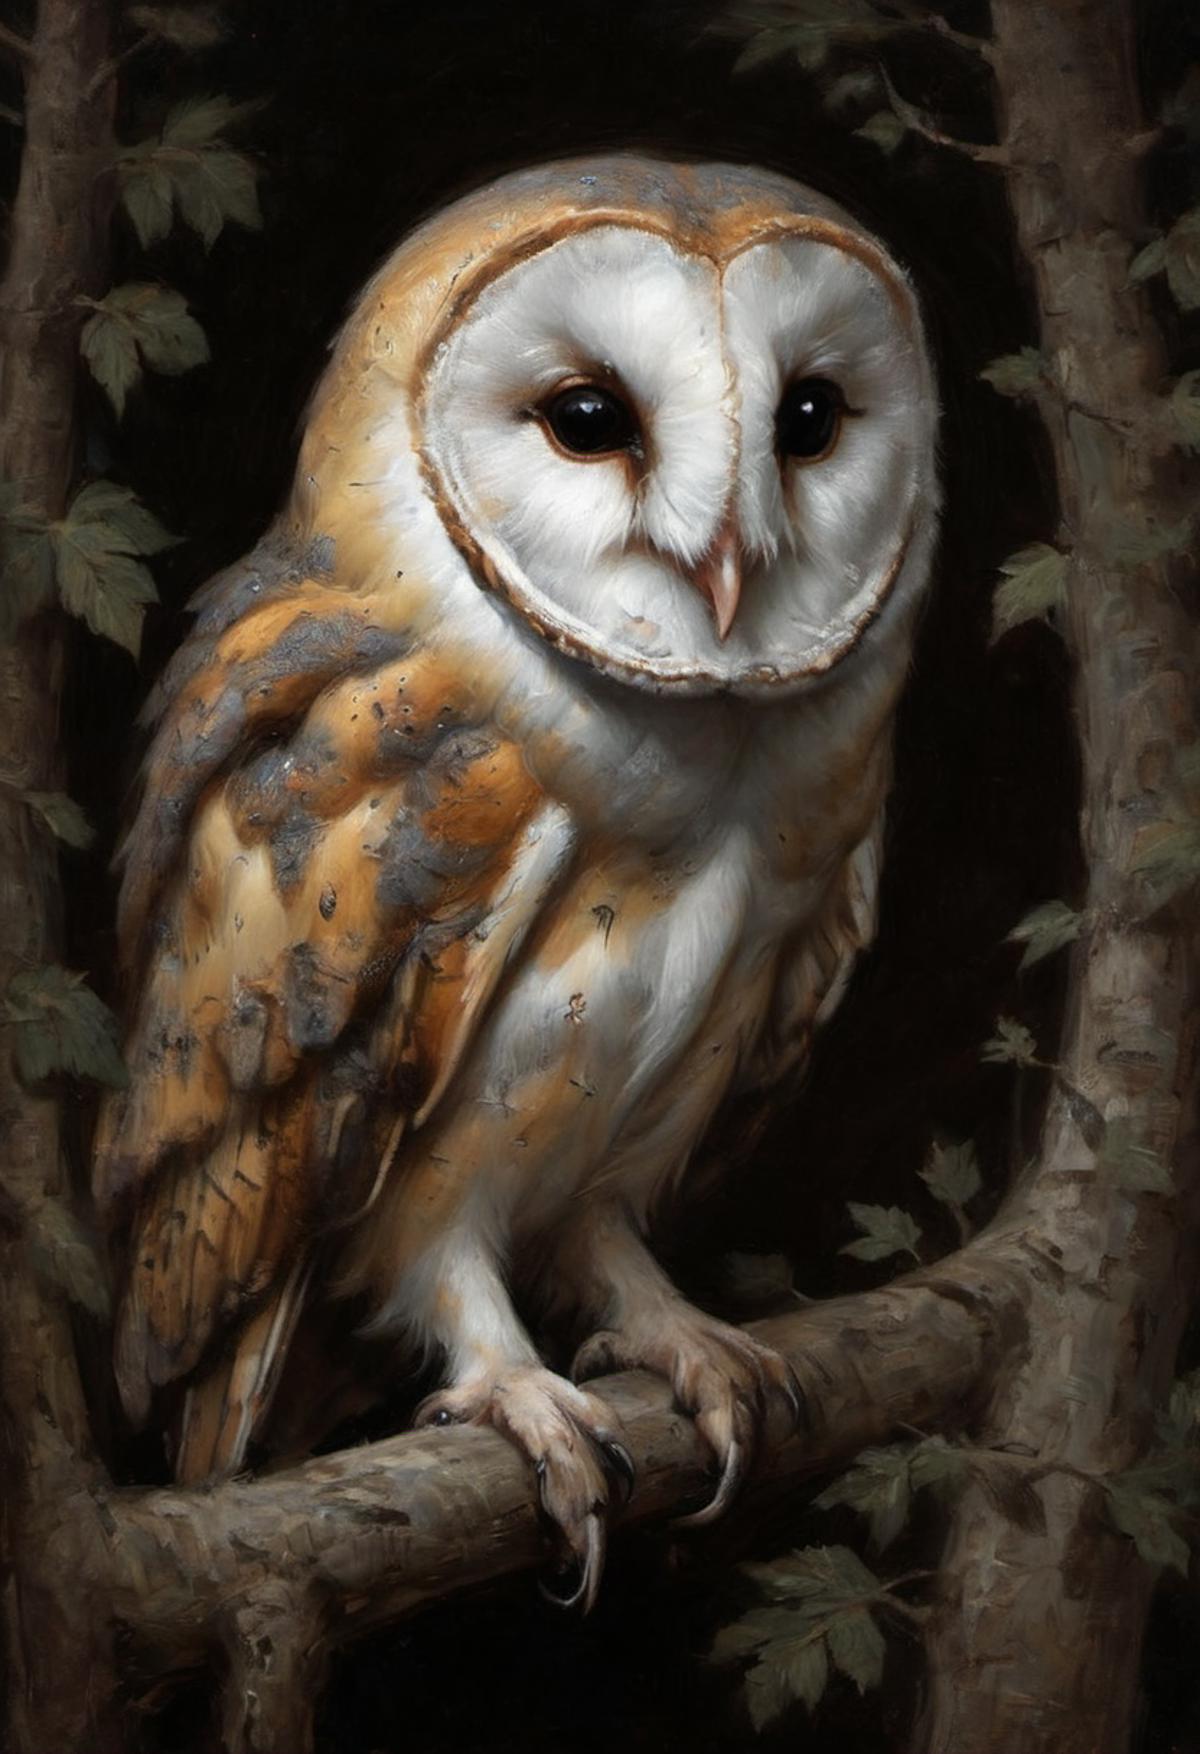 An owl perched on a tree branch in a painting.